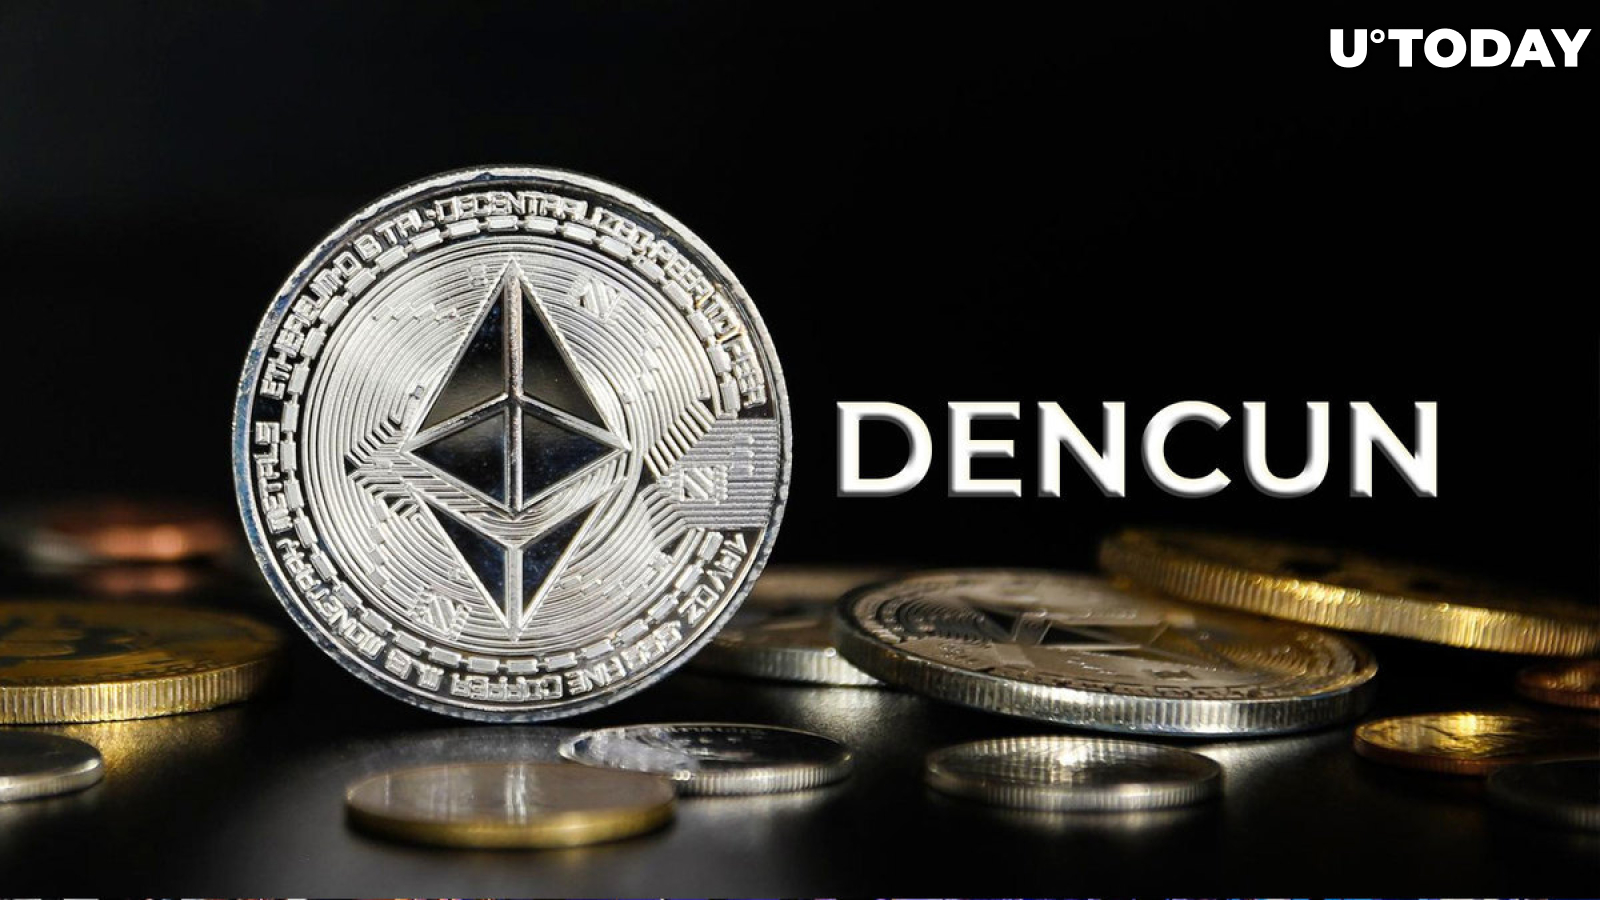 Ethereum's Dencun Upgrade: Two Key Dates to Watch as Testing Advances